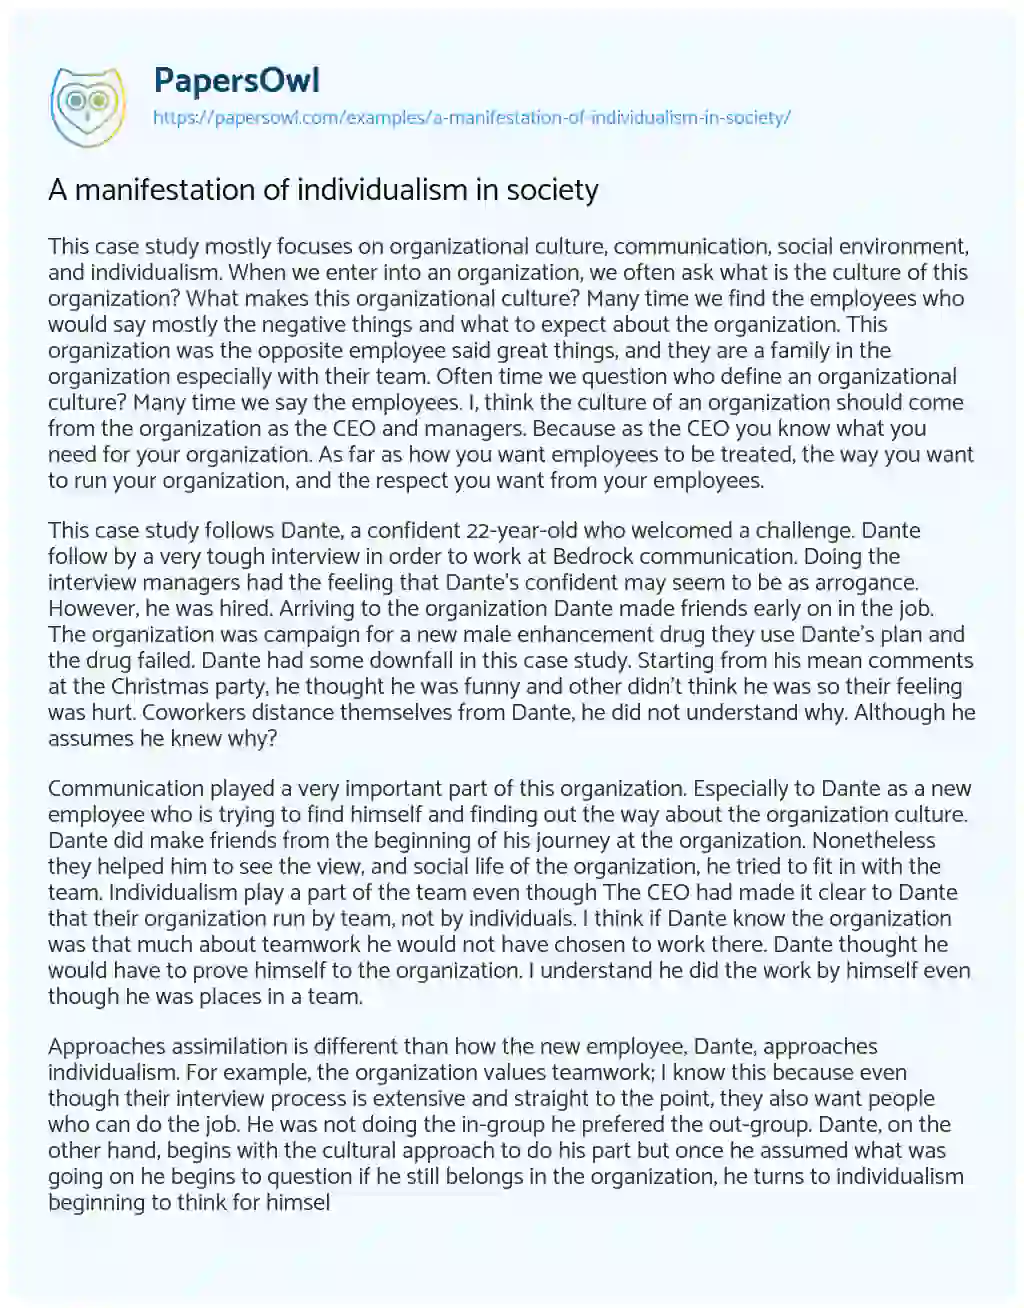 Essay on A Manifestation of Individualism in Society